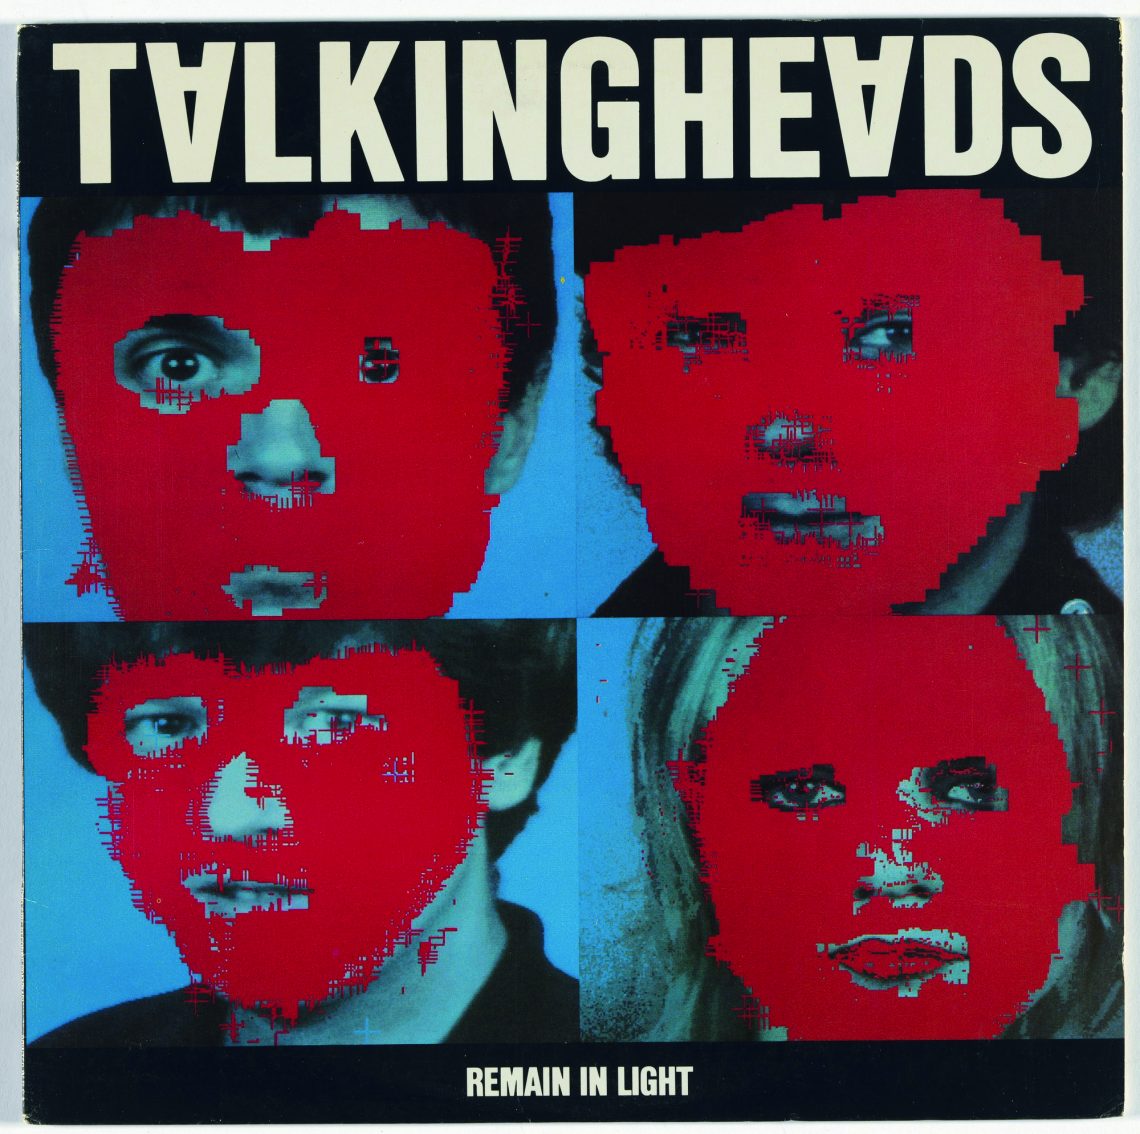 remain in light